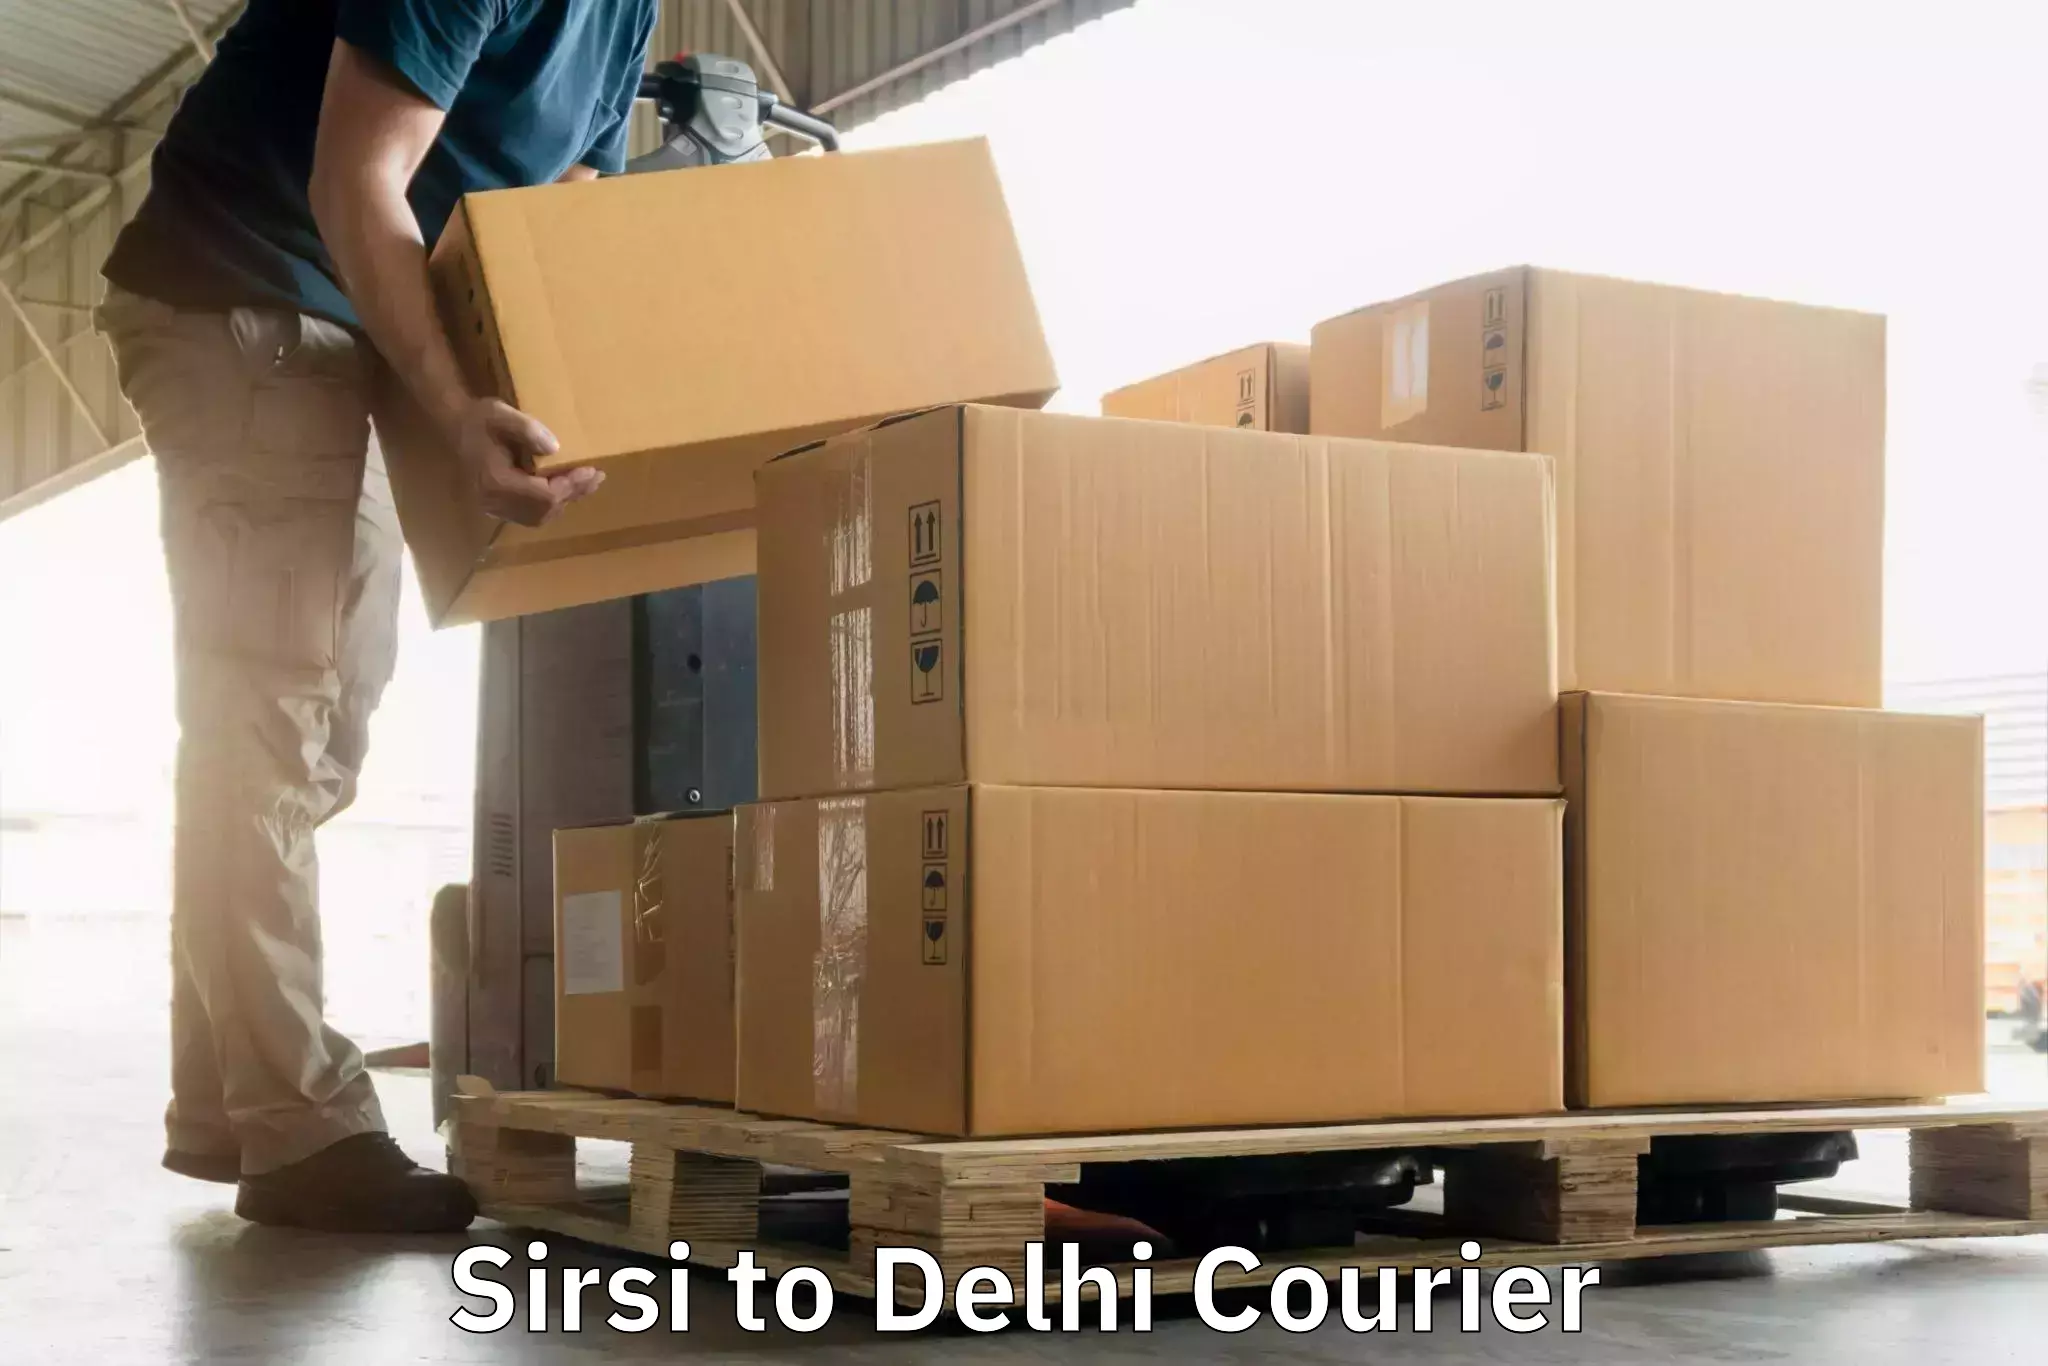 Global shipping networks Sirsi to Delhi